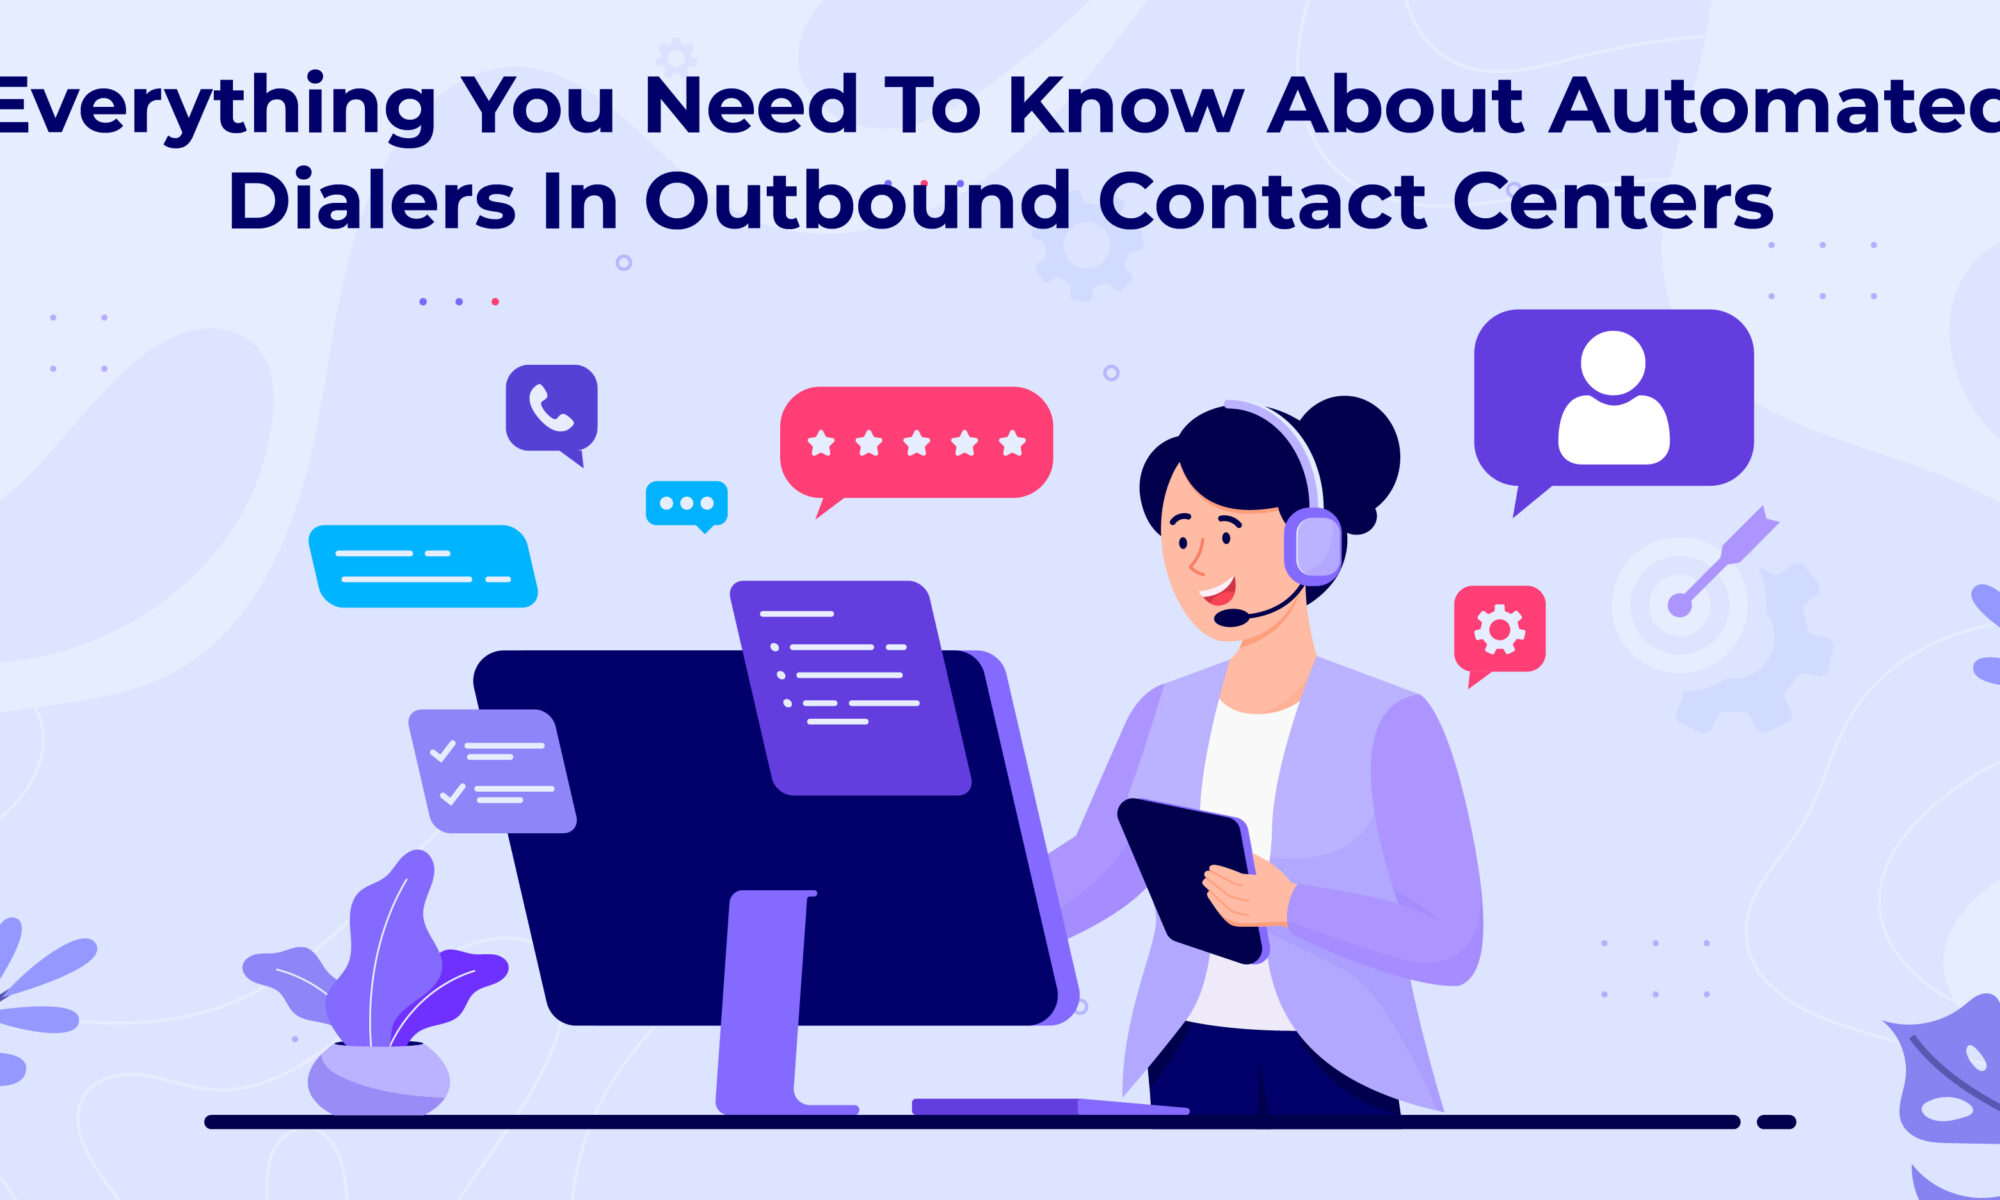 Contact Centers Automate Dialers